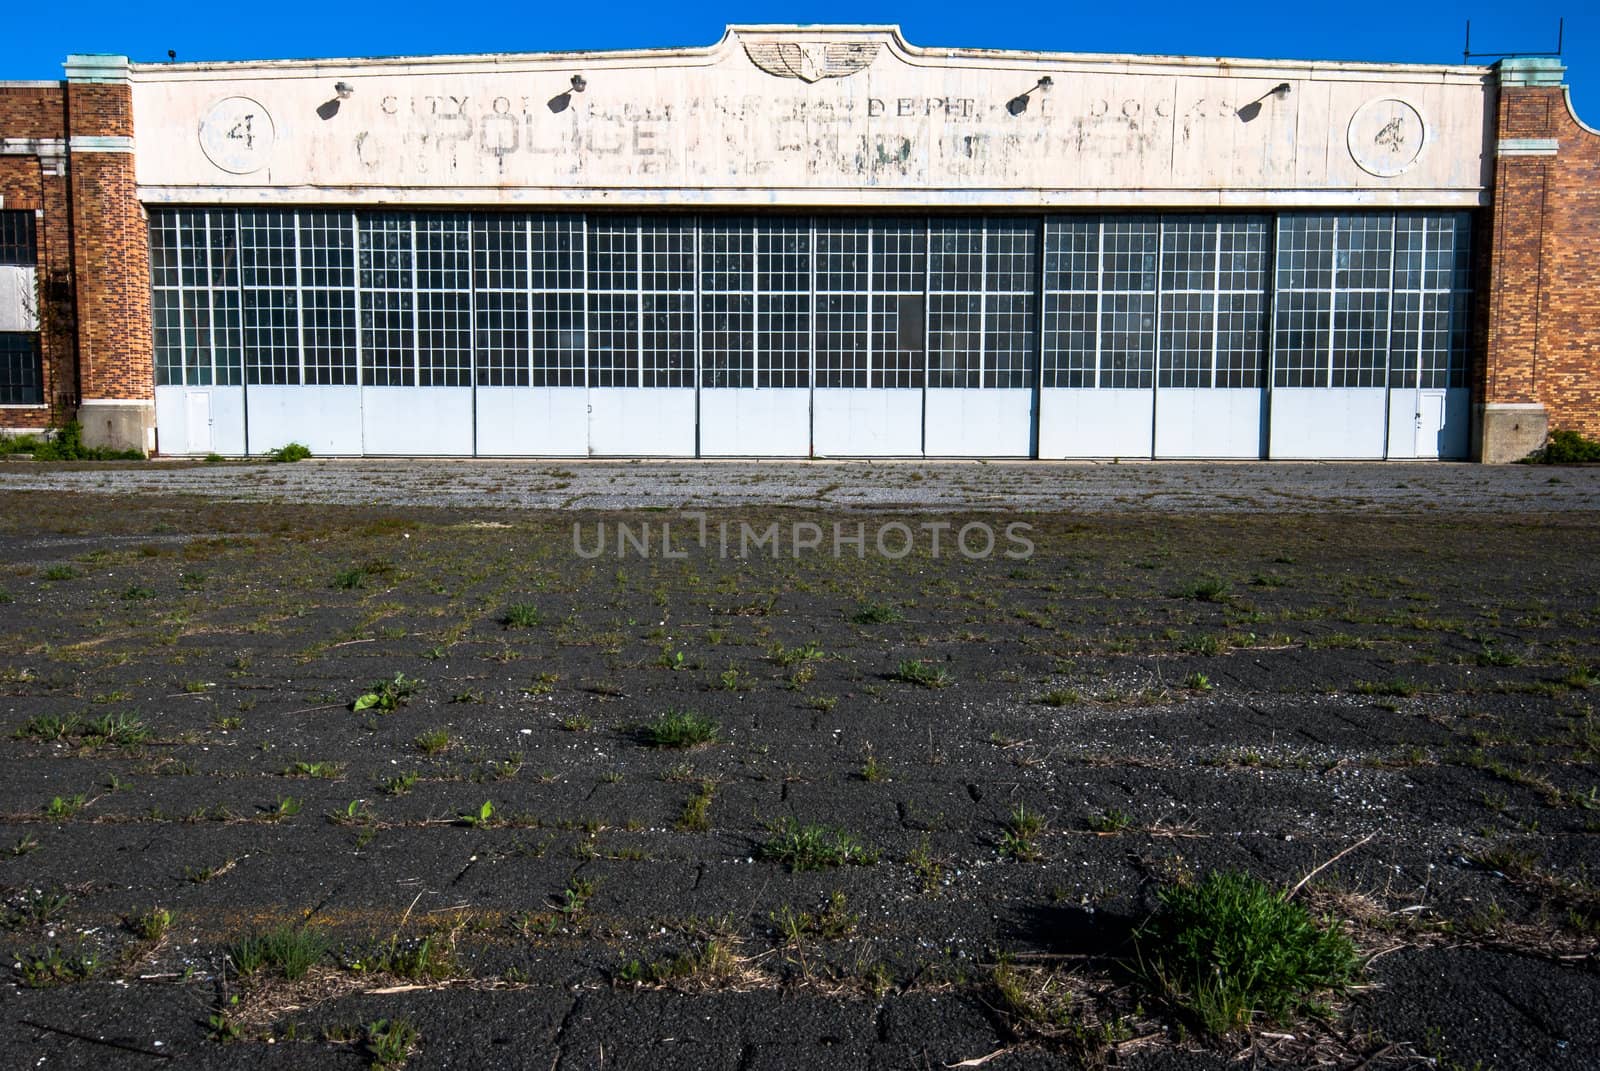 Photograph of an abandoned Aircraft Hangar with faded paint and text.  Weeds are growing up though the old tarmac.